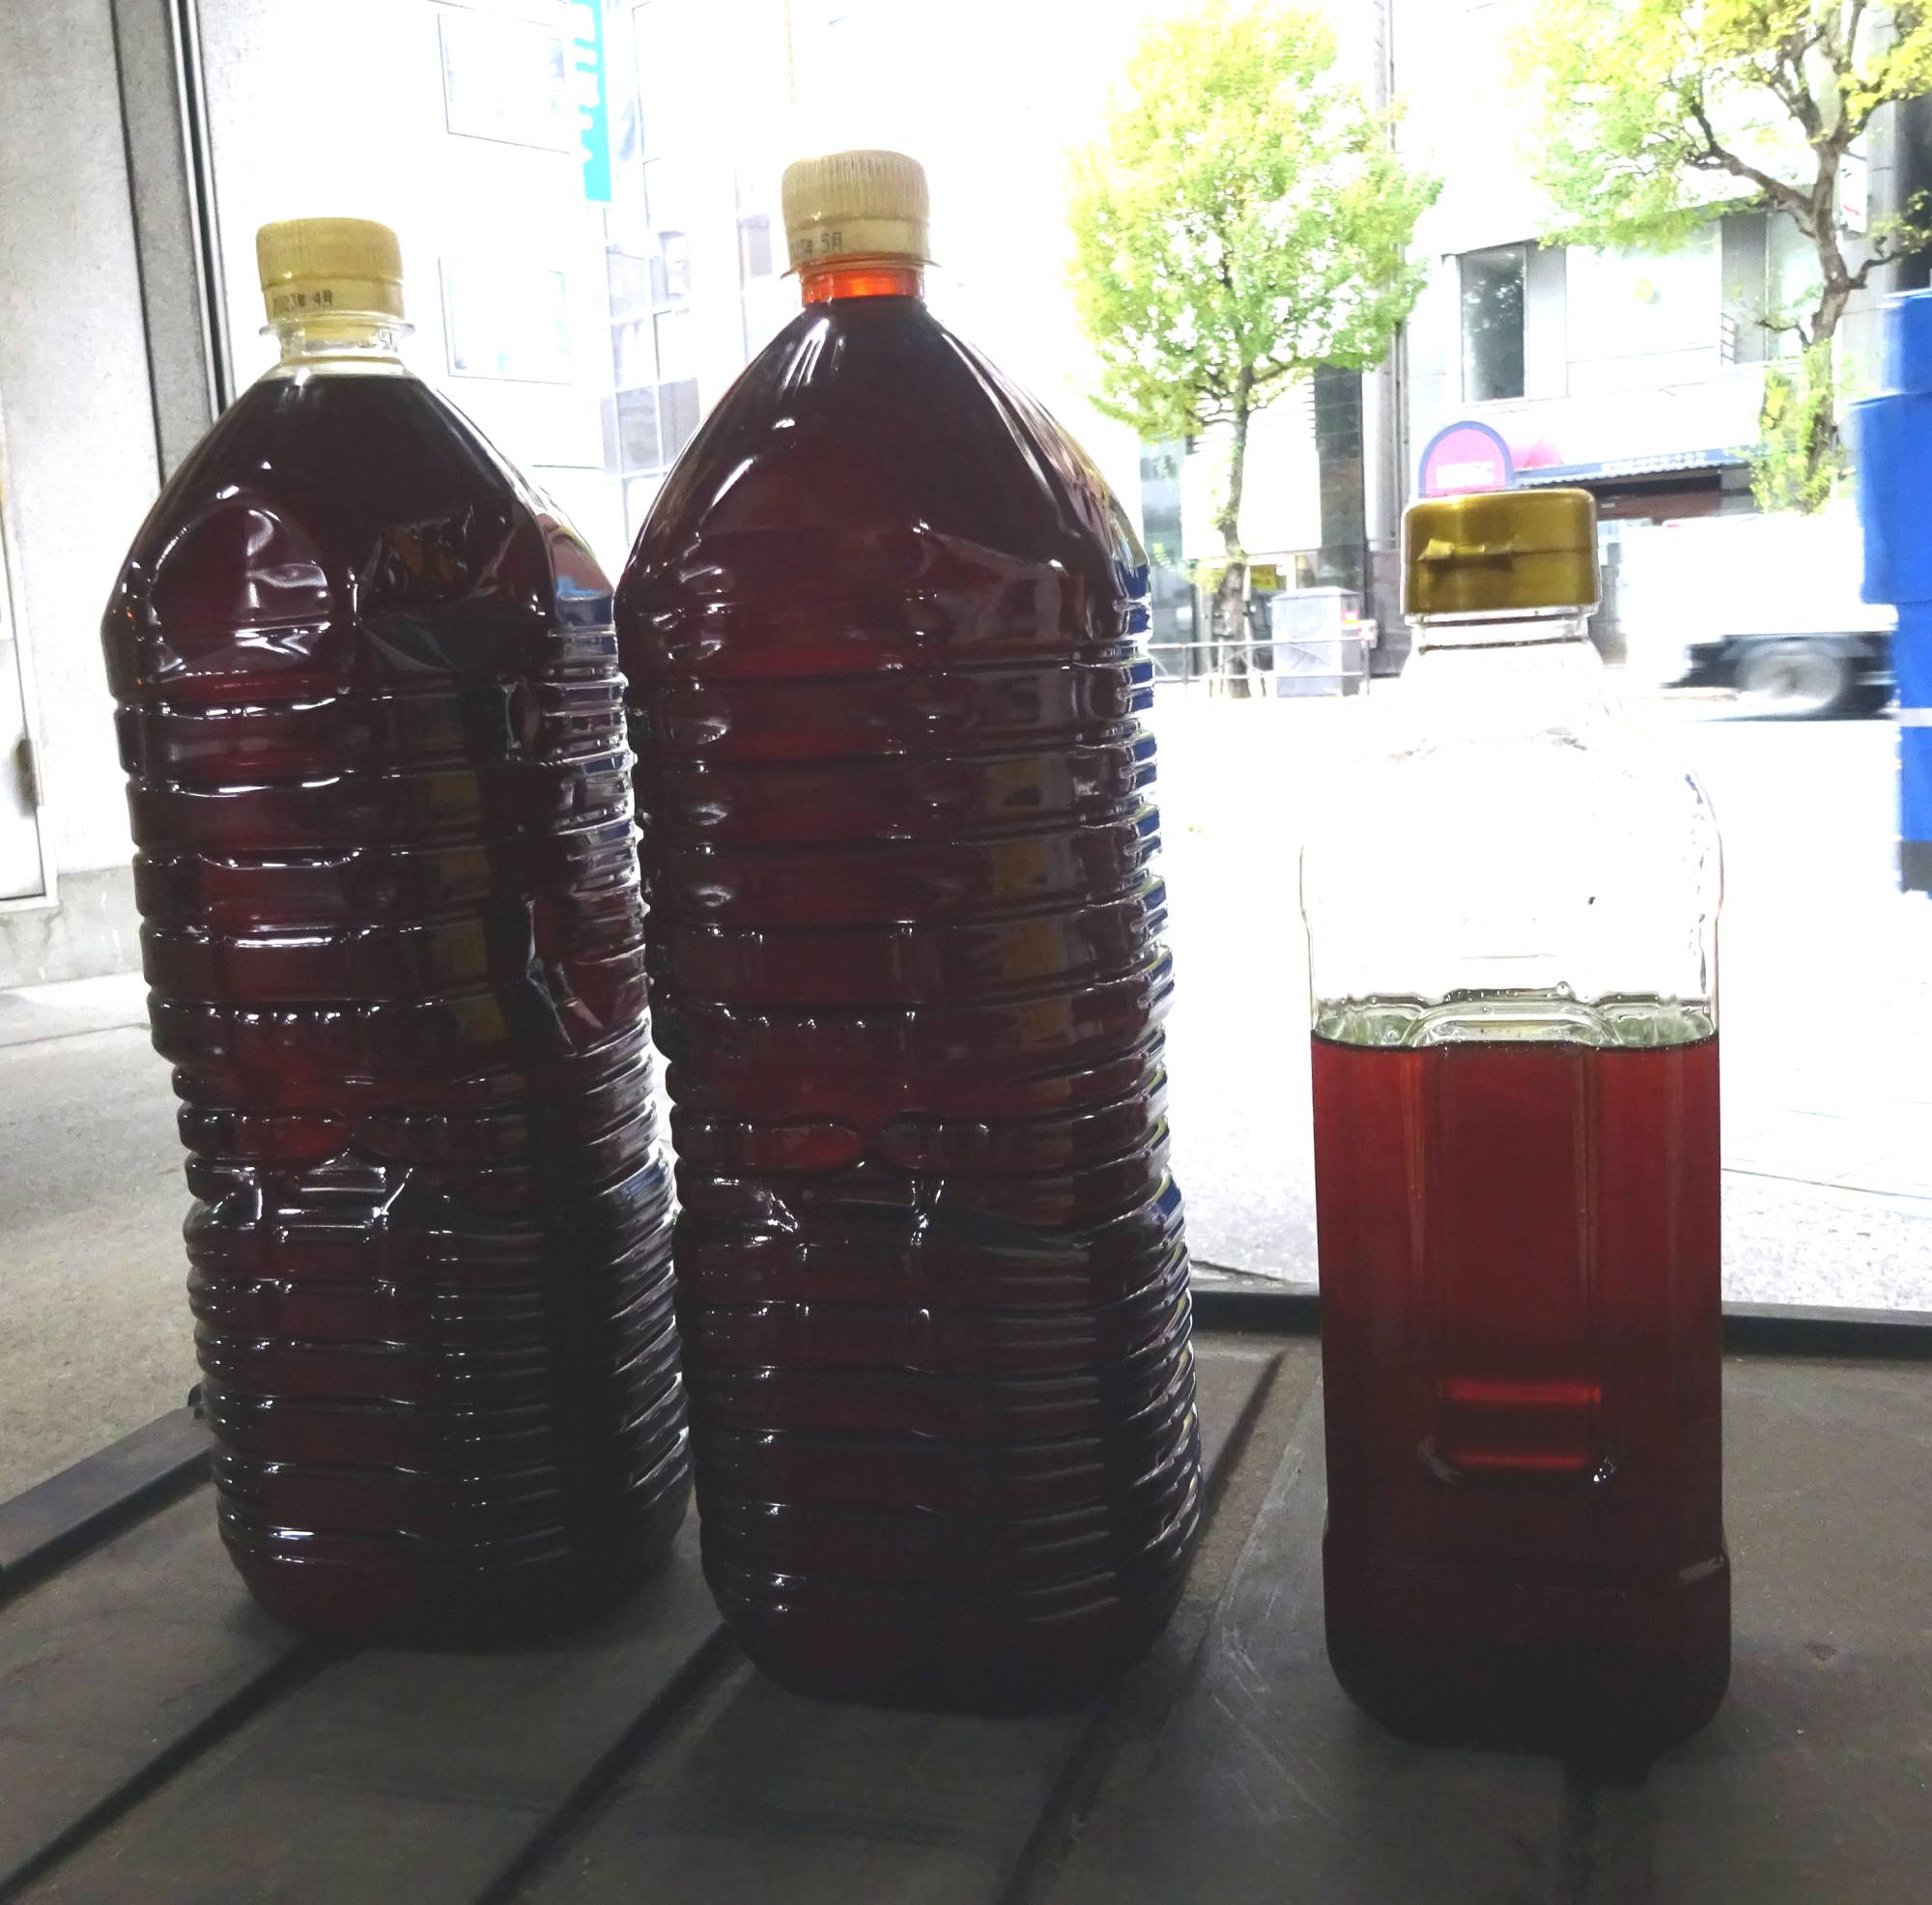 Plastic bottles containing waste cooking oil. If waste cooking oil is shipped overseas, it will become difficult to supply sustainable aviation fuel in Japan, which could lead to some eco-friendly foreign airlines avoiding flying into the country. | CHUGOKU SHIMBUN